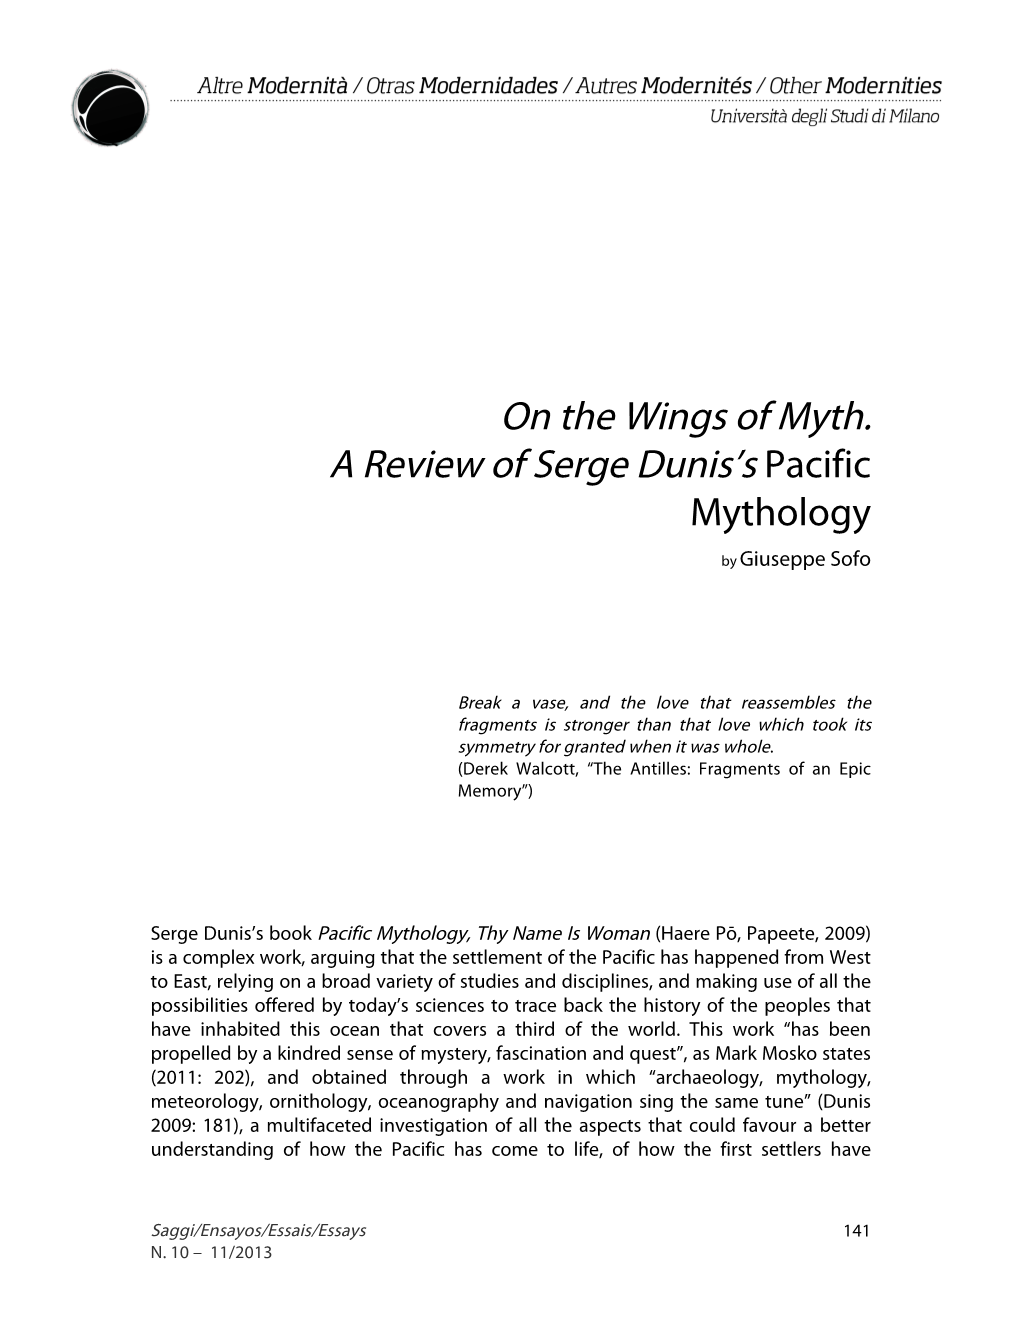 On the Wings of Myth. a Review of Serge Dunis's Pacific